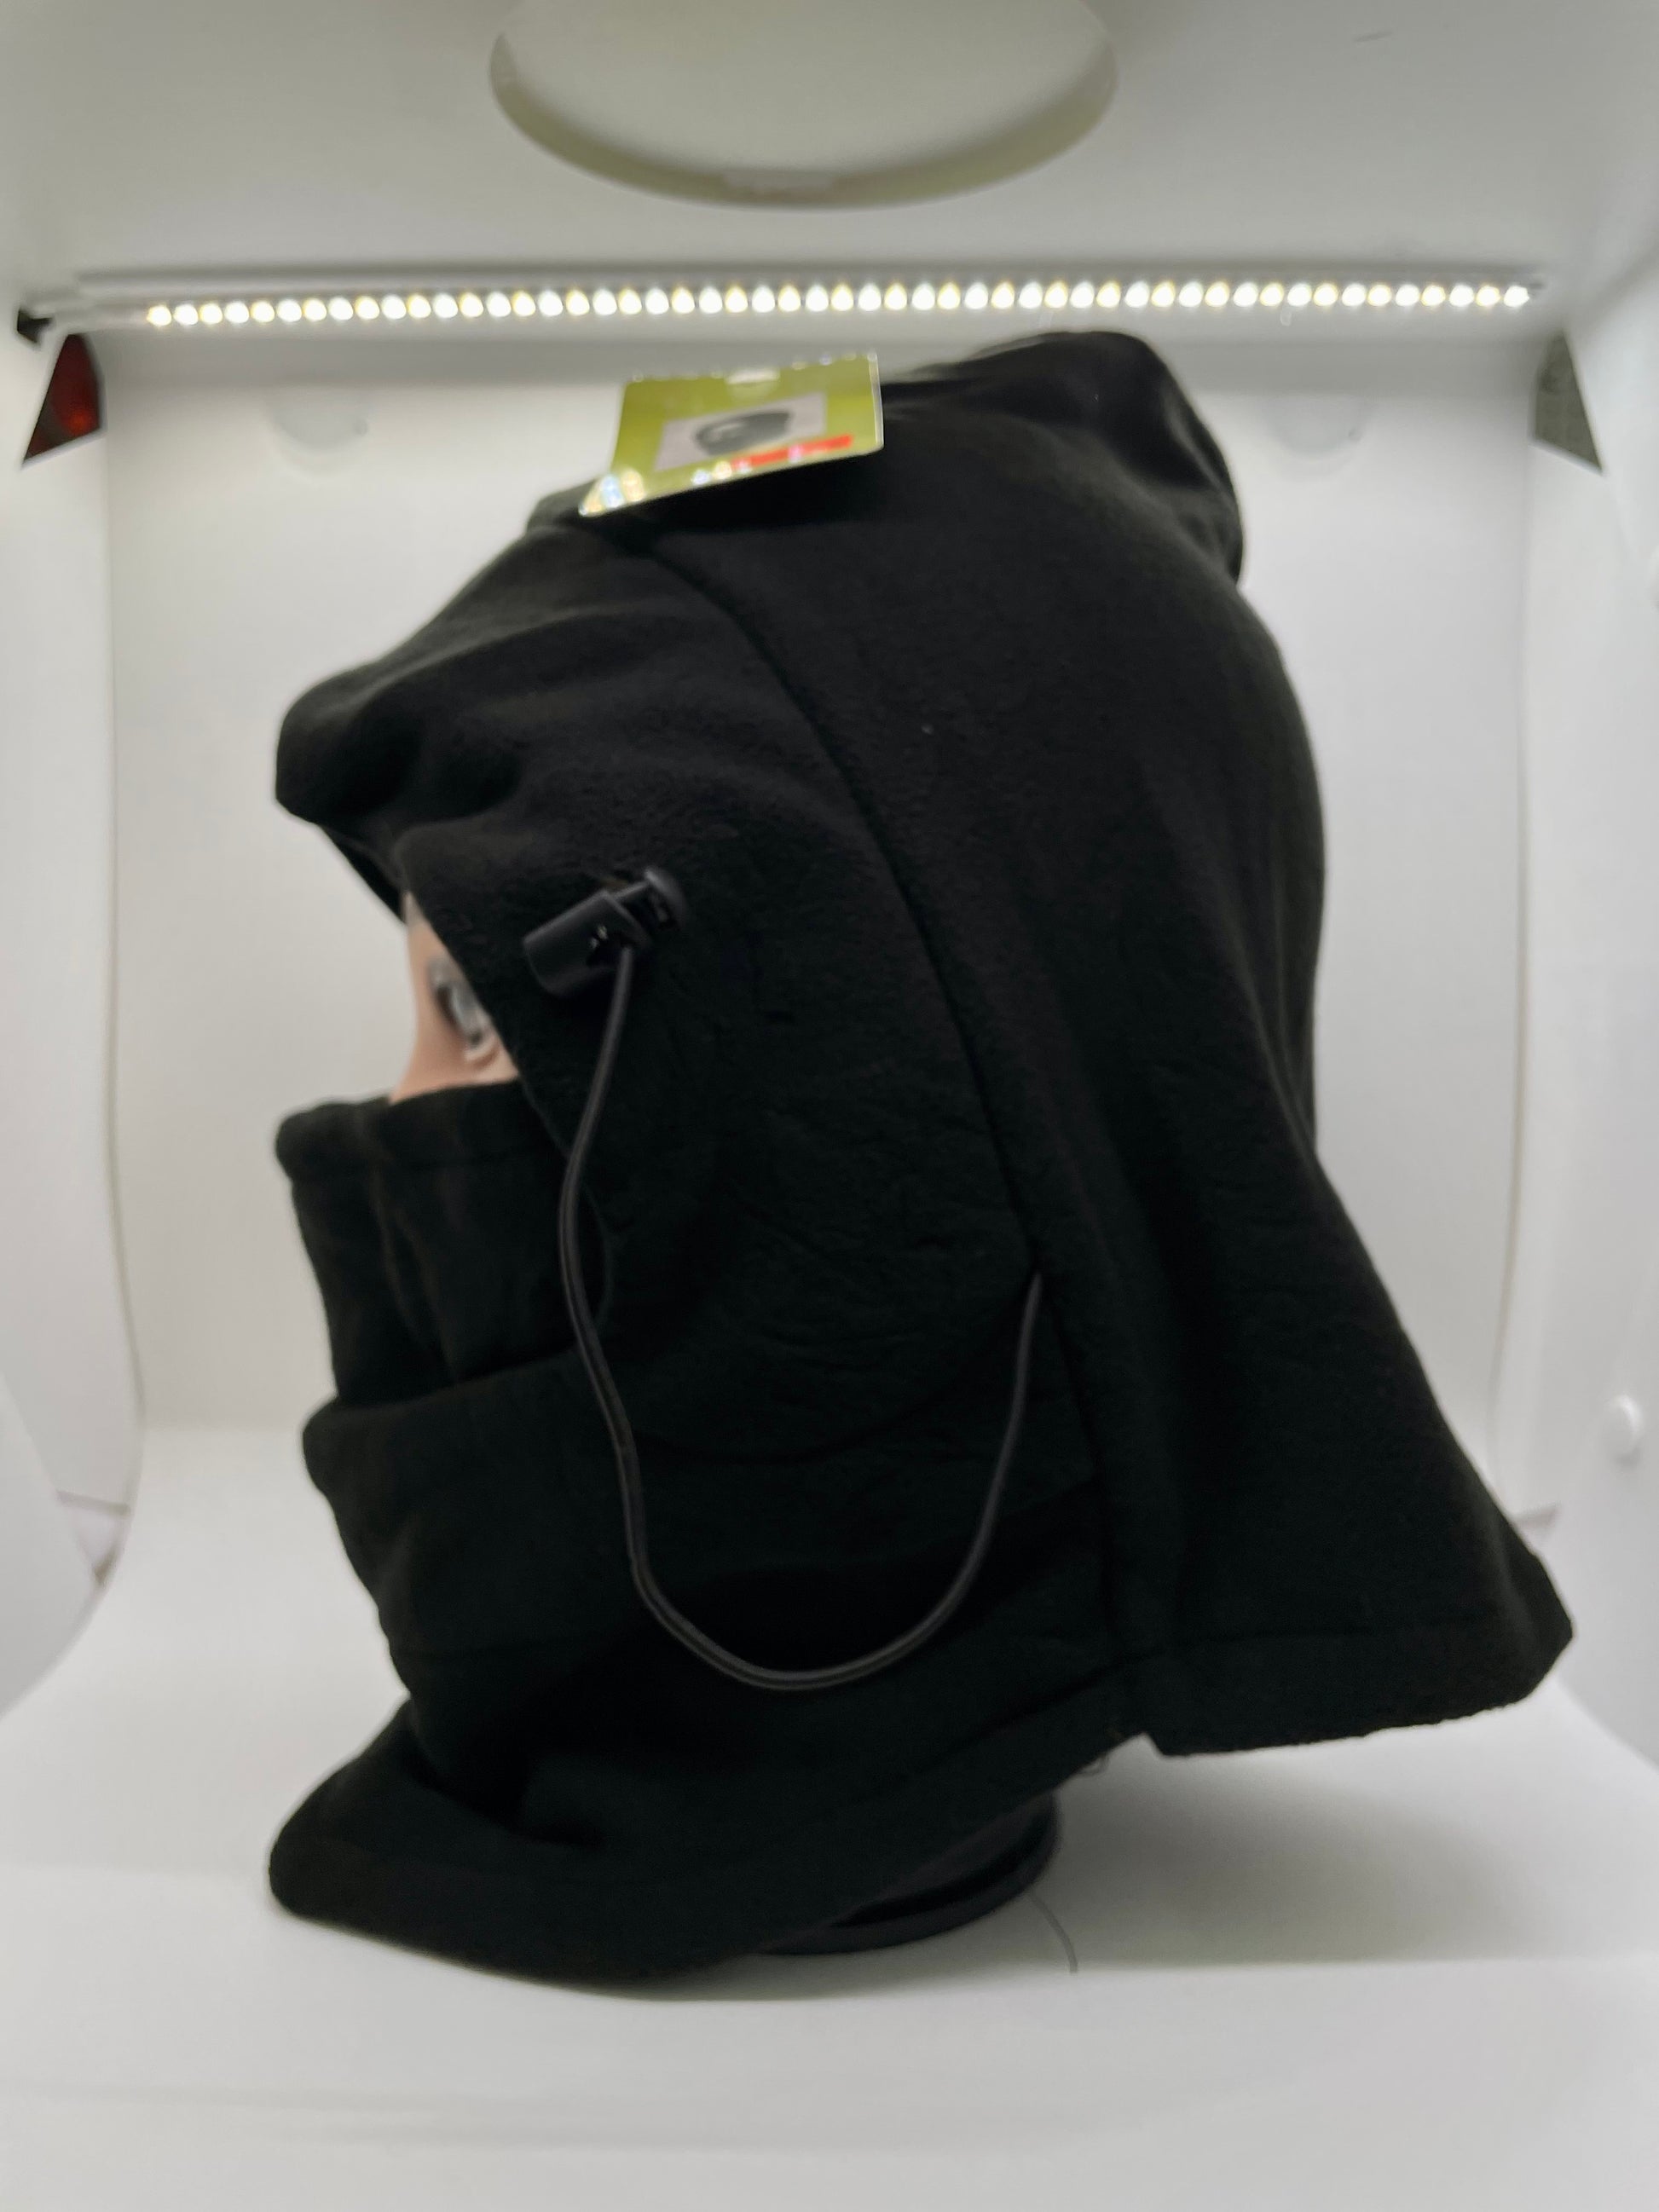 Black face covering hood with a padded headband and a stretchy fit